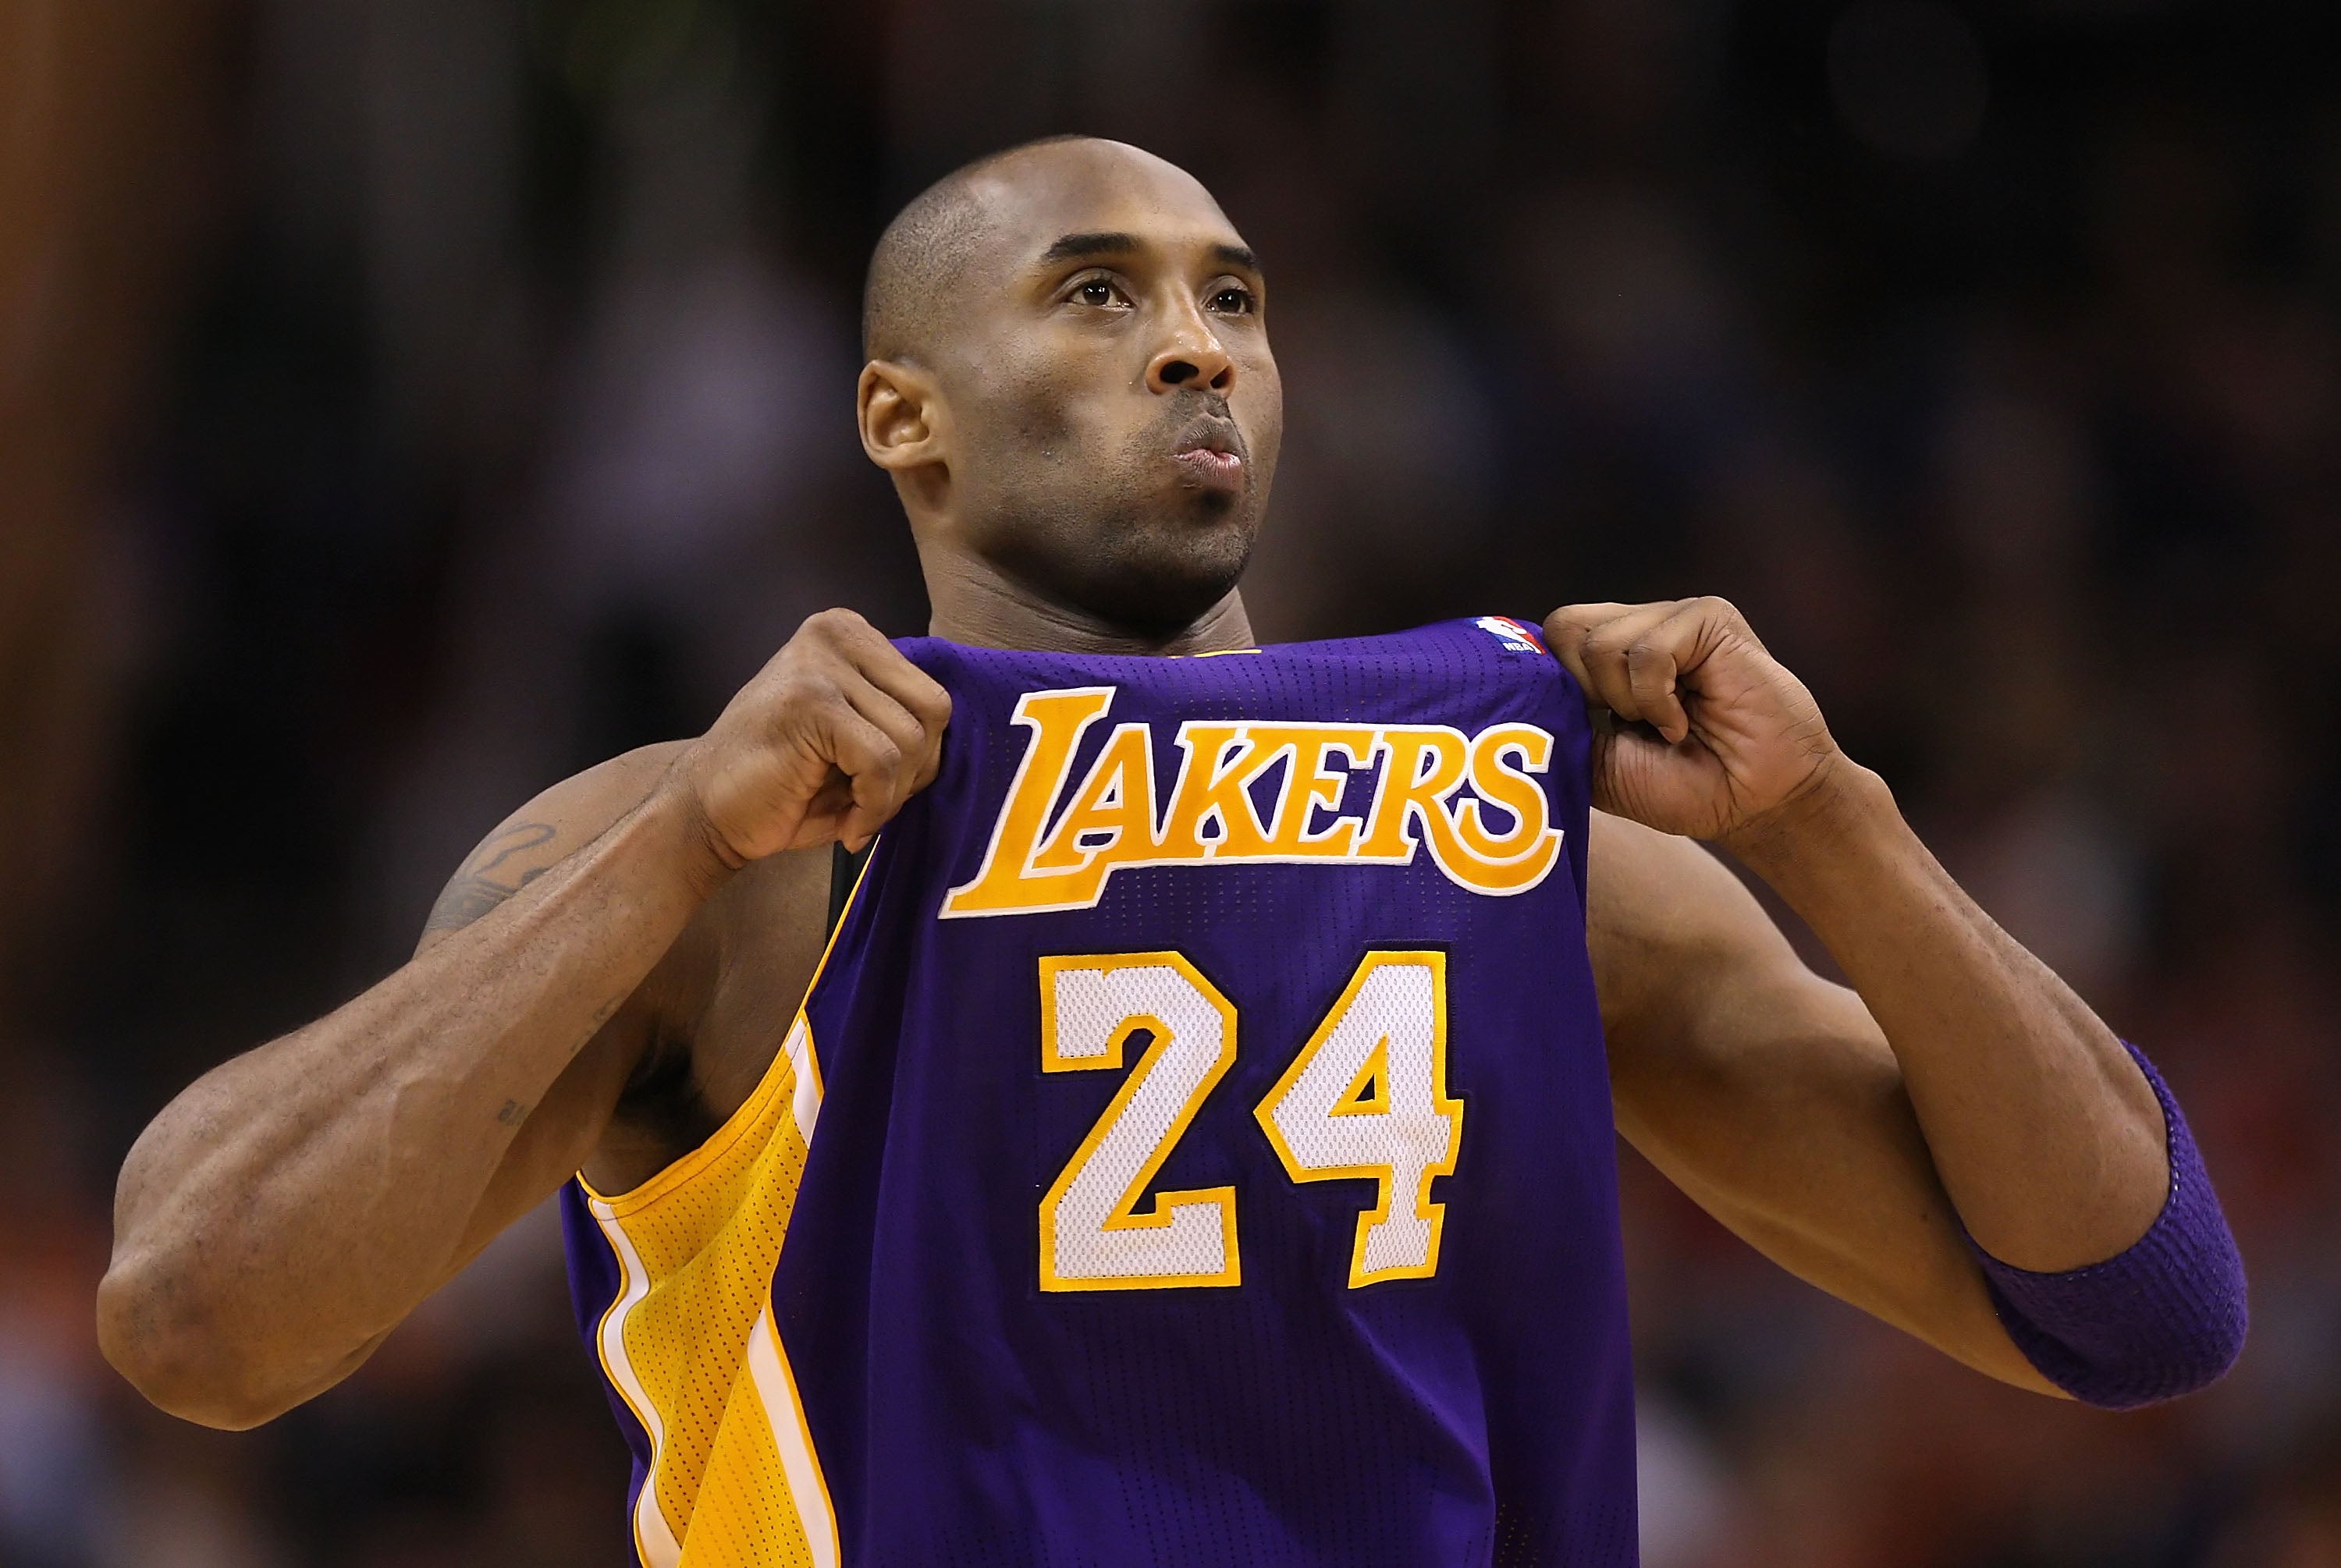 Kobe Bryant is remembered on his 43rd birthday